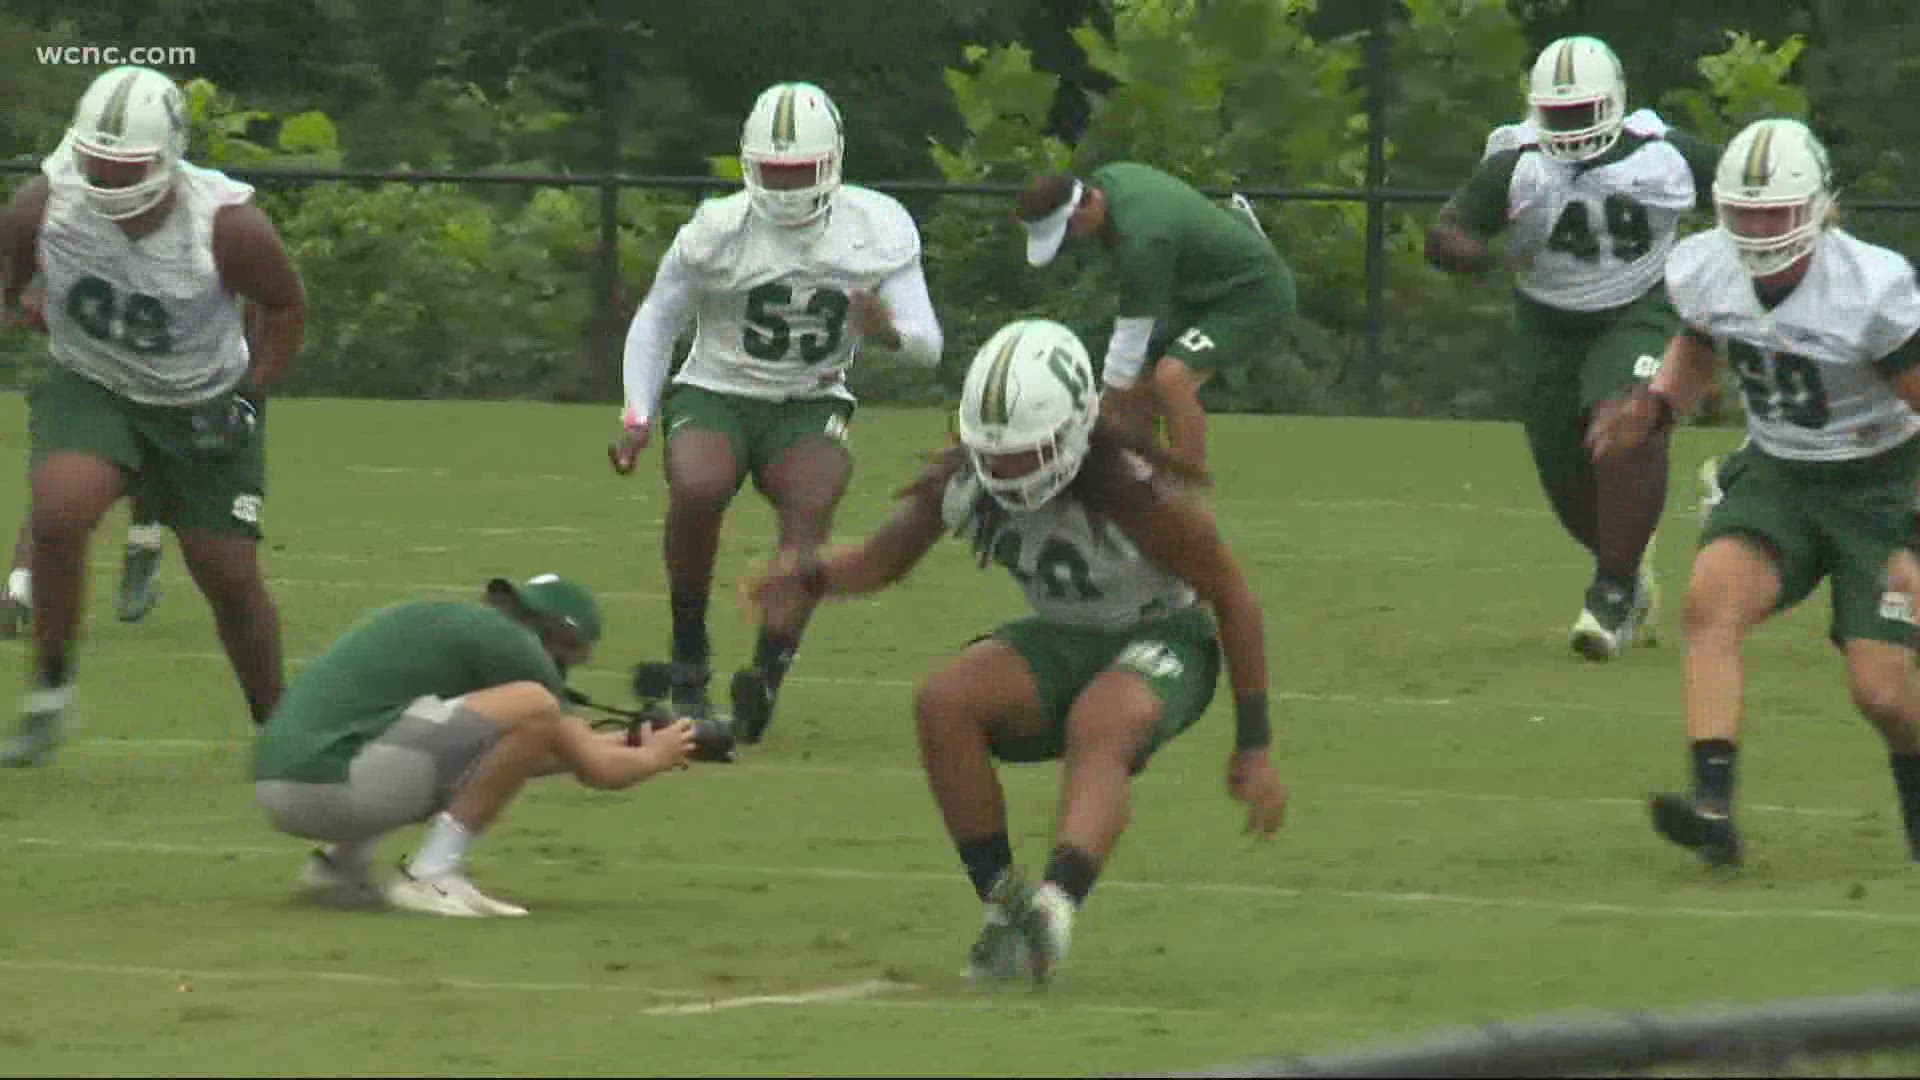 Some college football teams are getting back to practice, including the Charlotte 49ers. WCNC was there this morning as the team took the field for the first time.